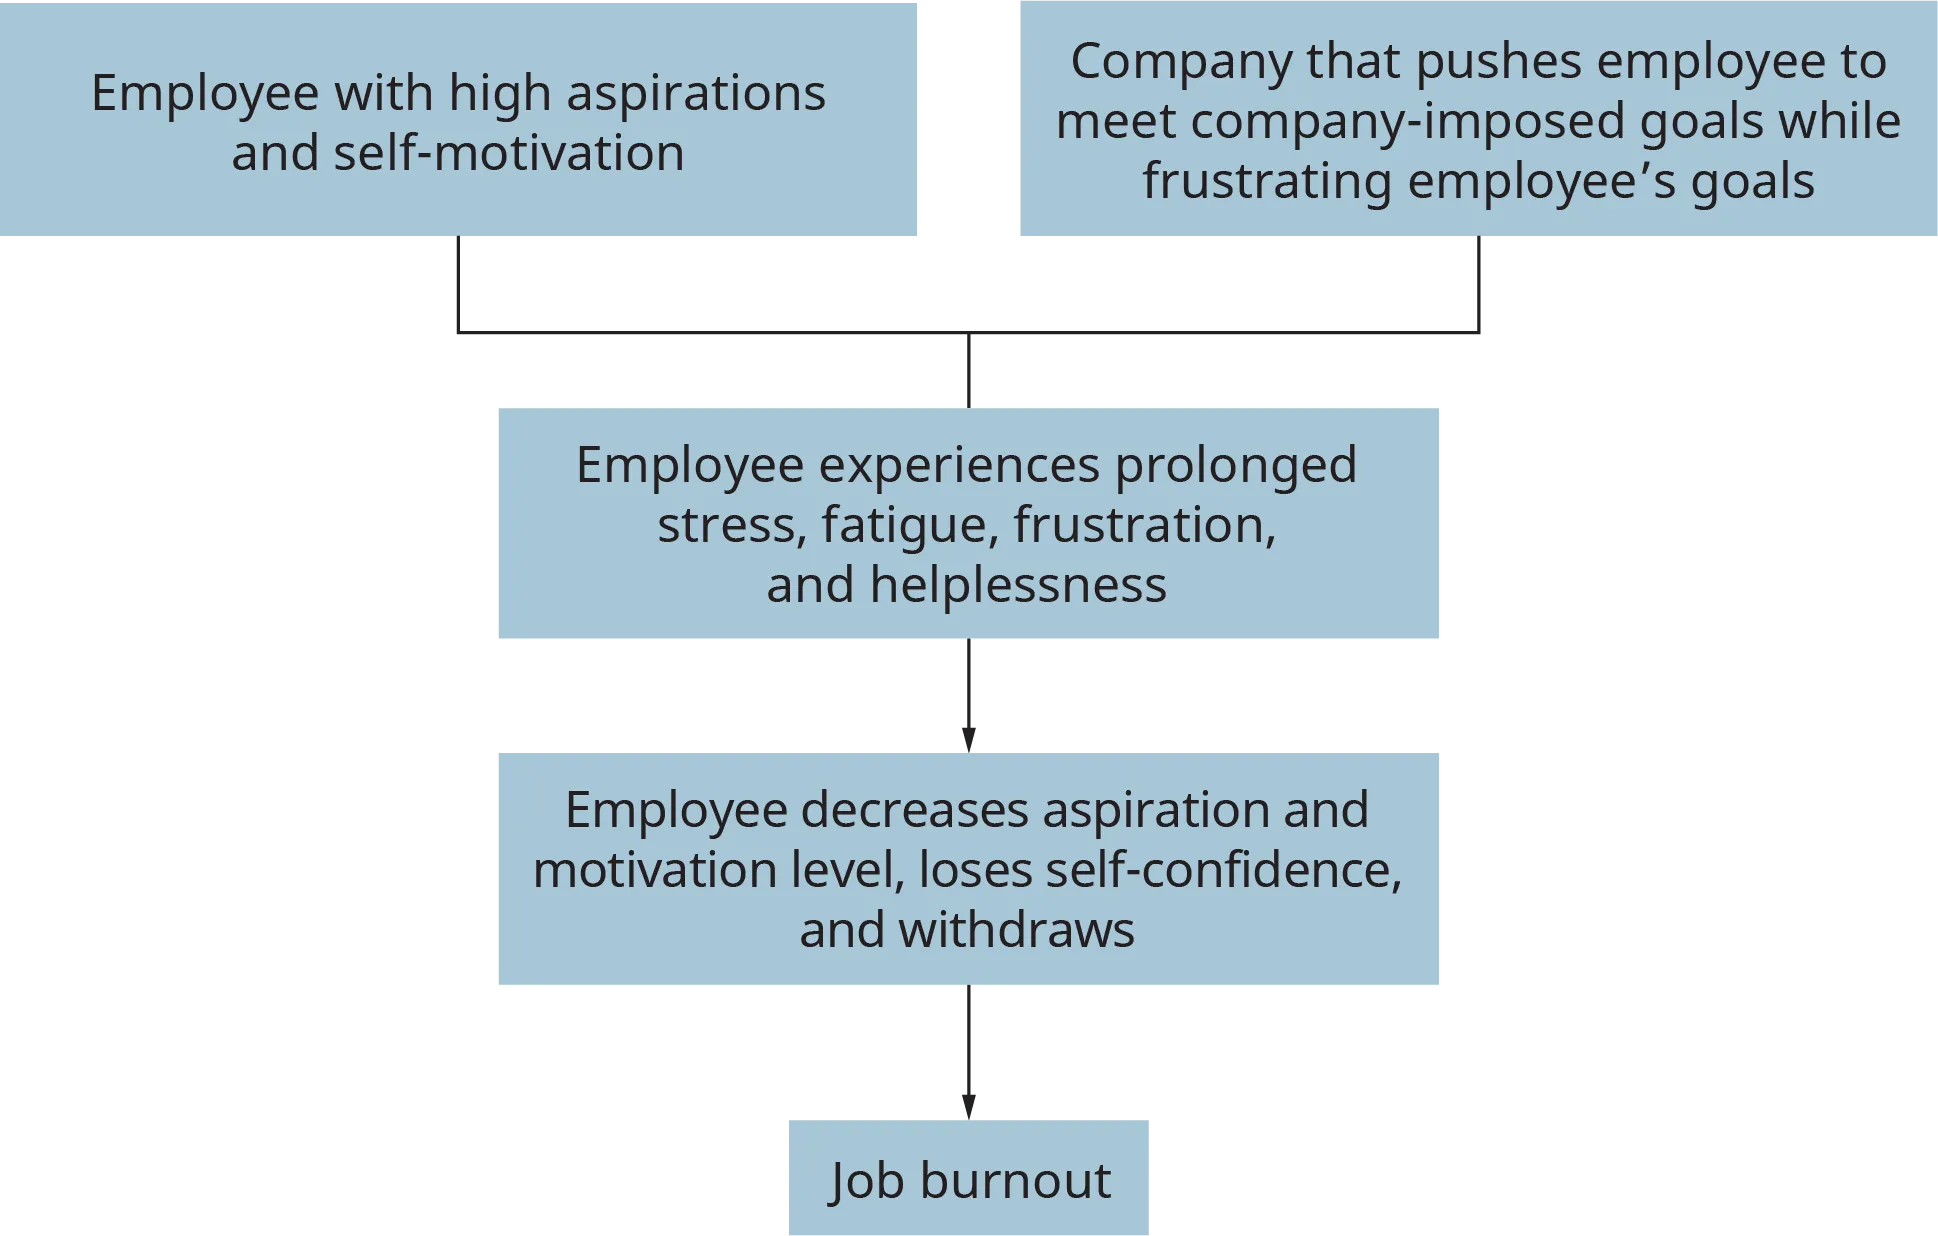 An illustration depicts the influences leading to job burnout.